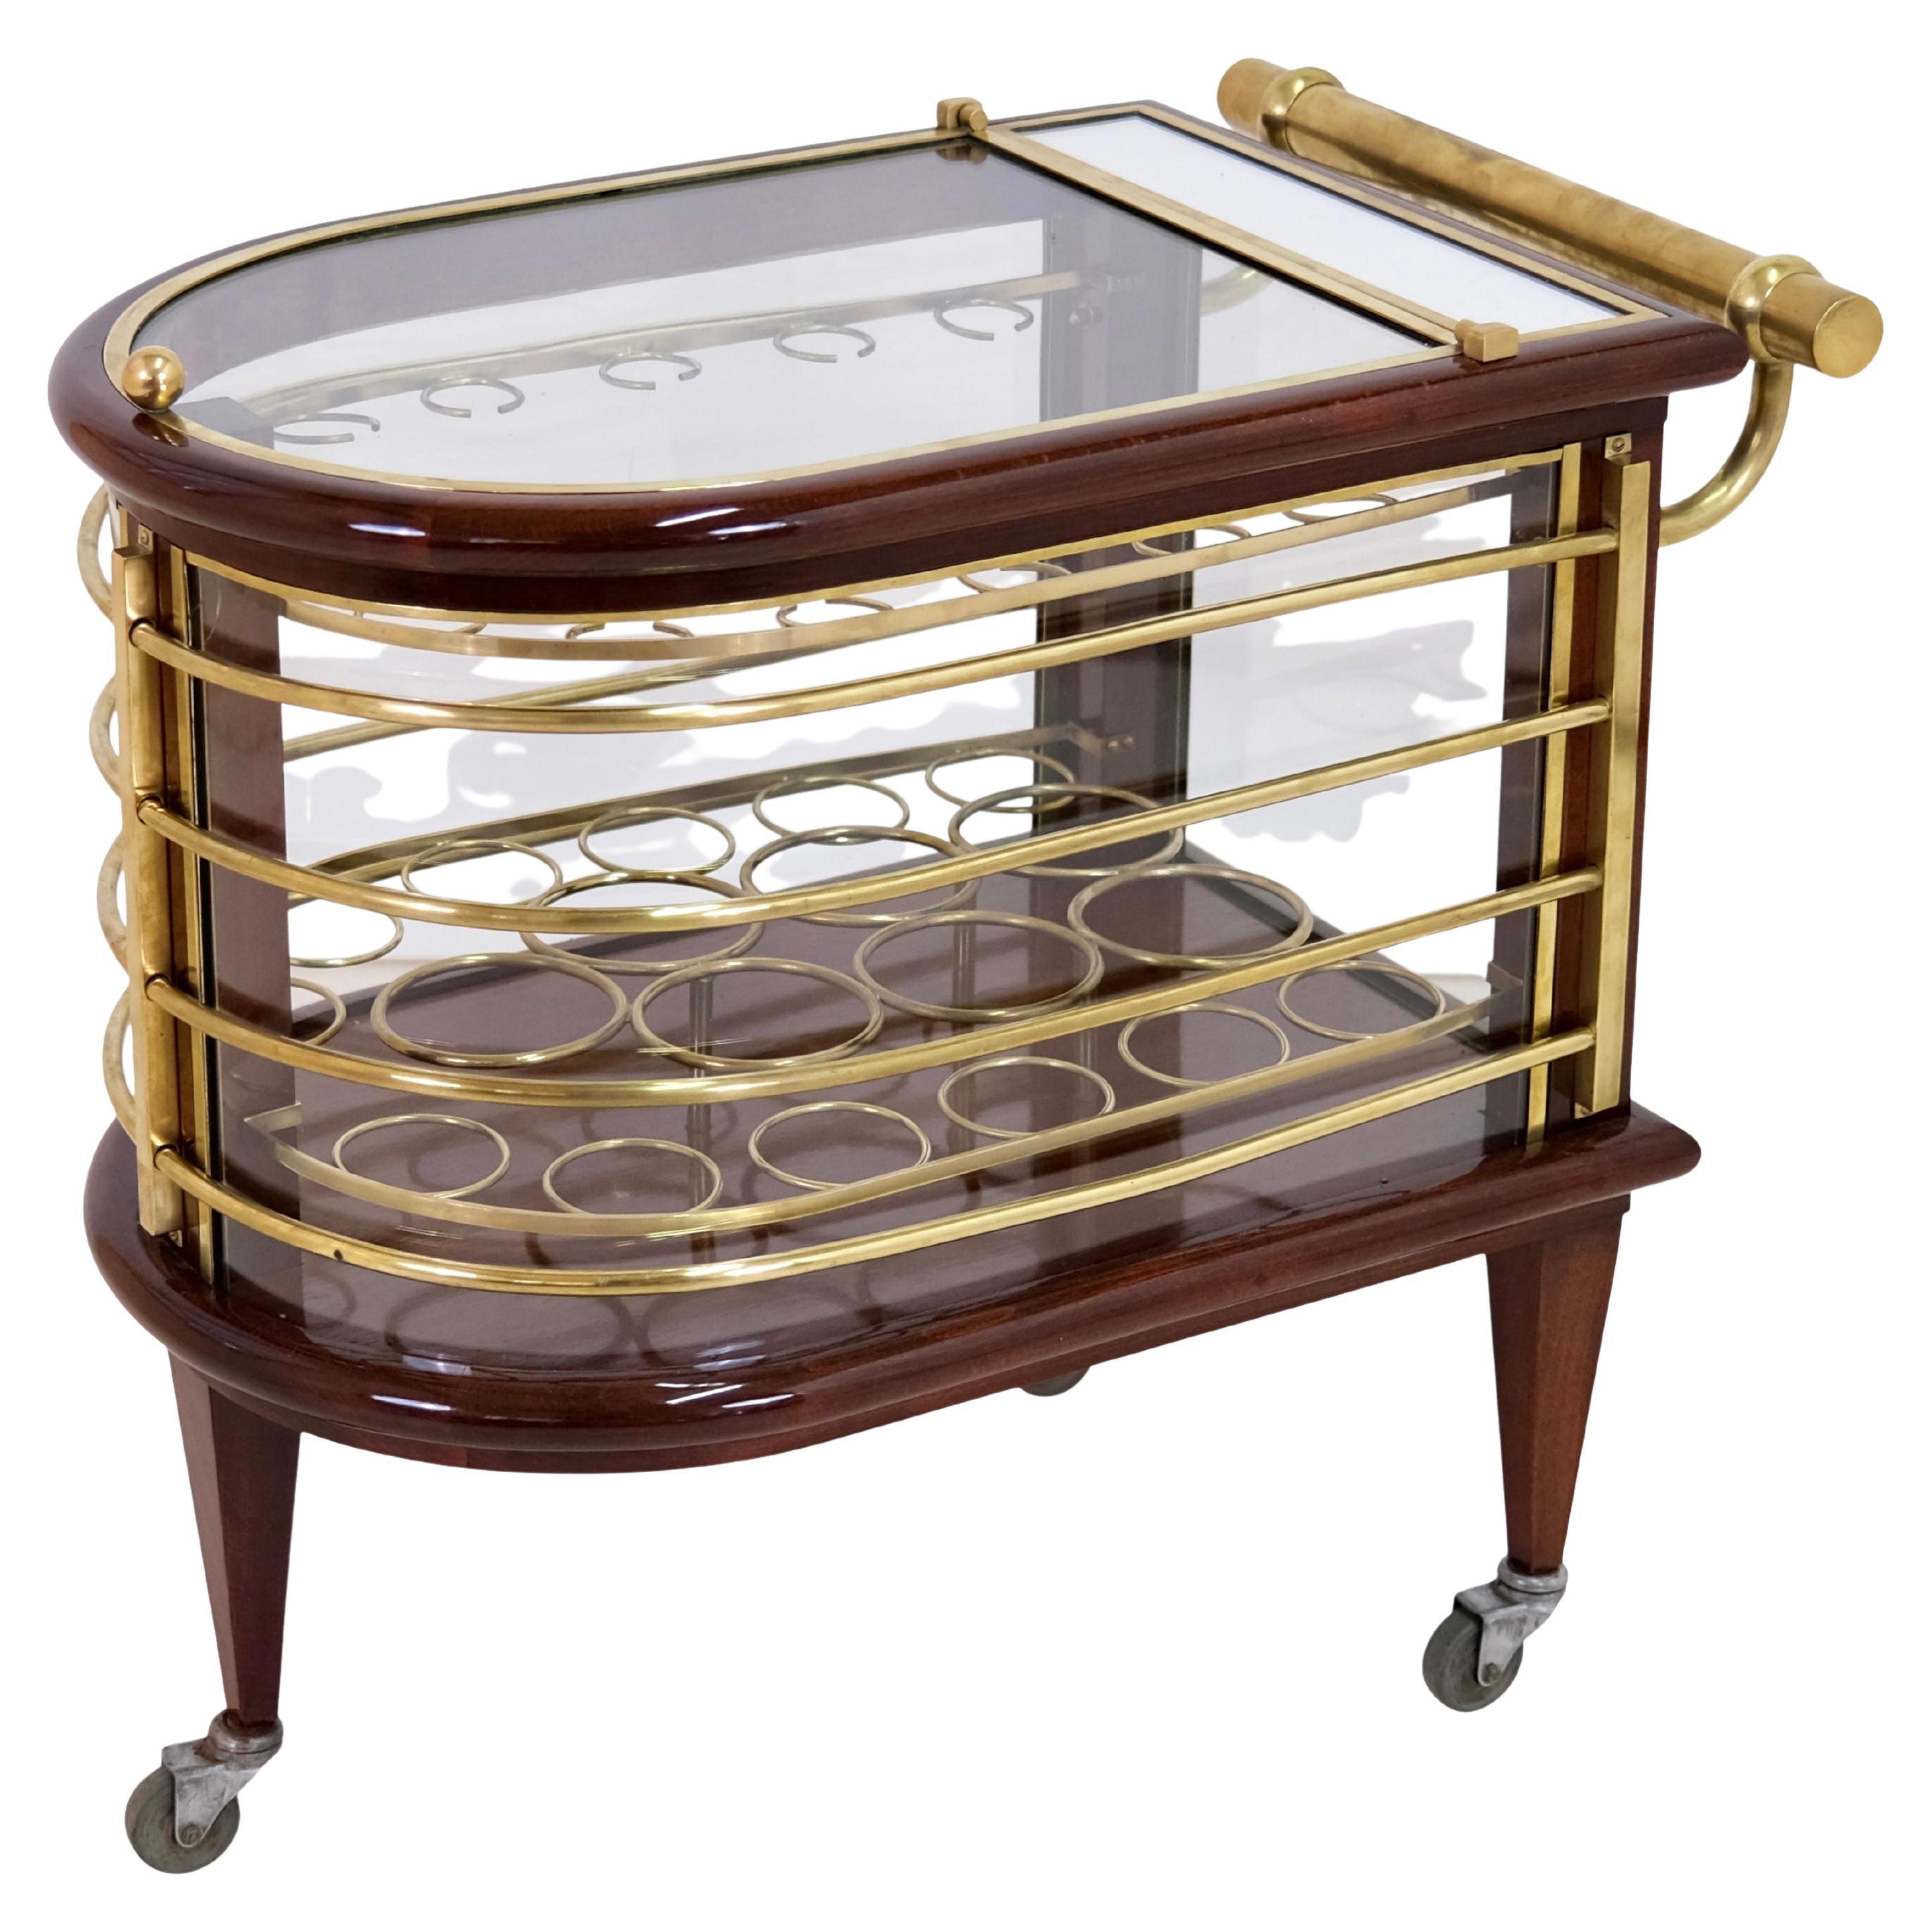 Exceptional 1920s French Art Deco Bar Cart in Wood and Brass with Vitrine Case